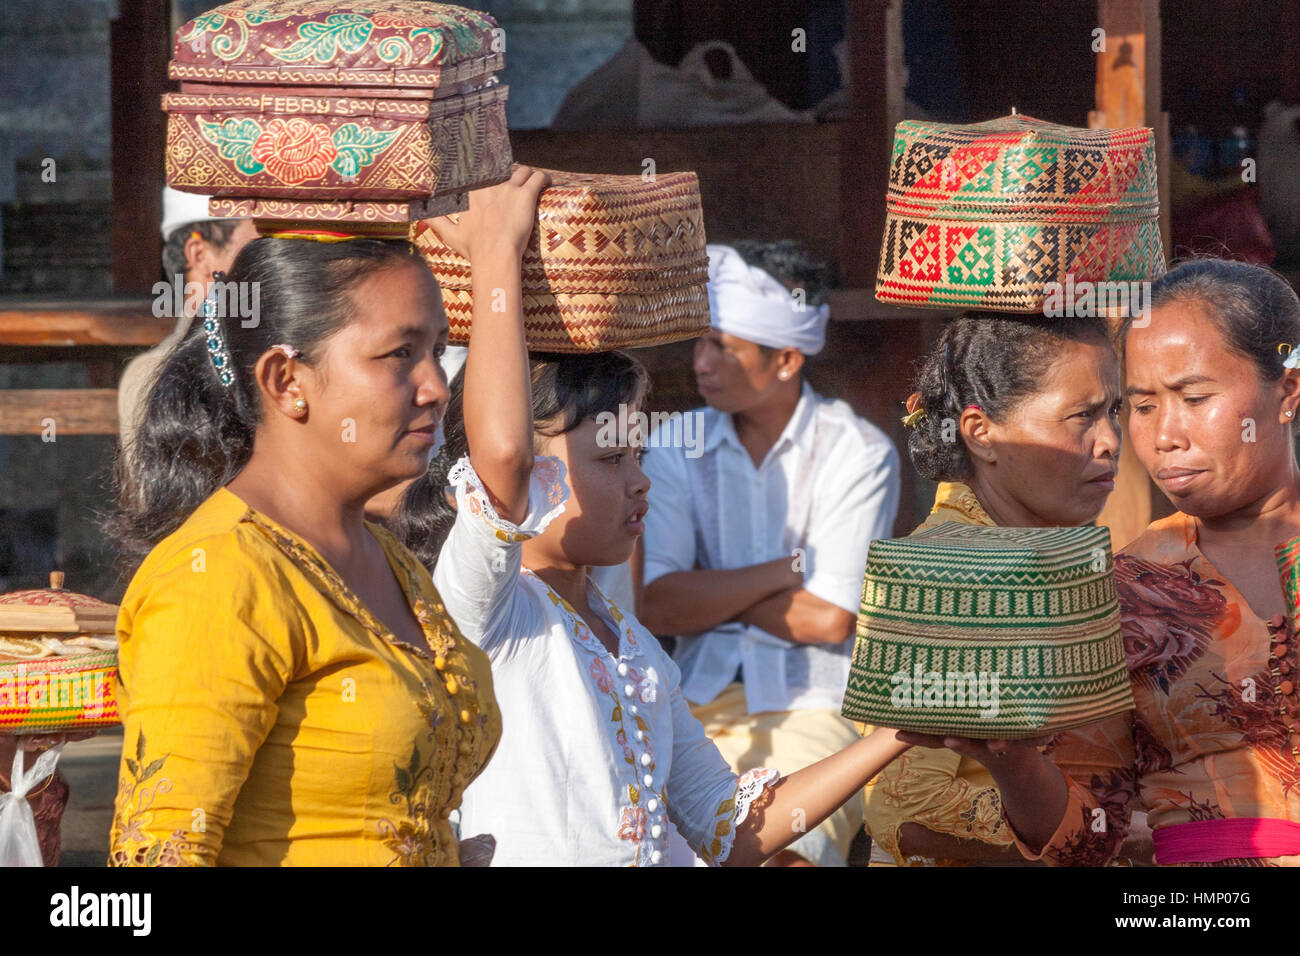 Women with baskets of offerings at the temple during the Galungan festival in Bali, Indonesia Stock Photo